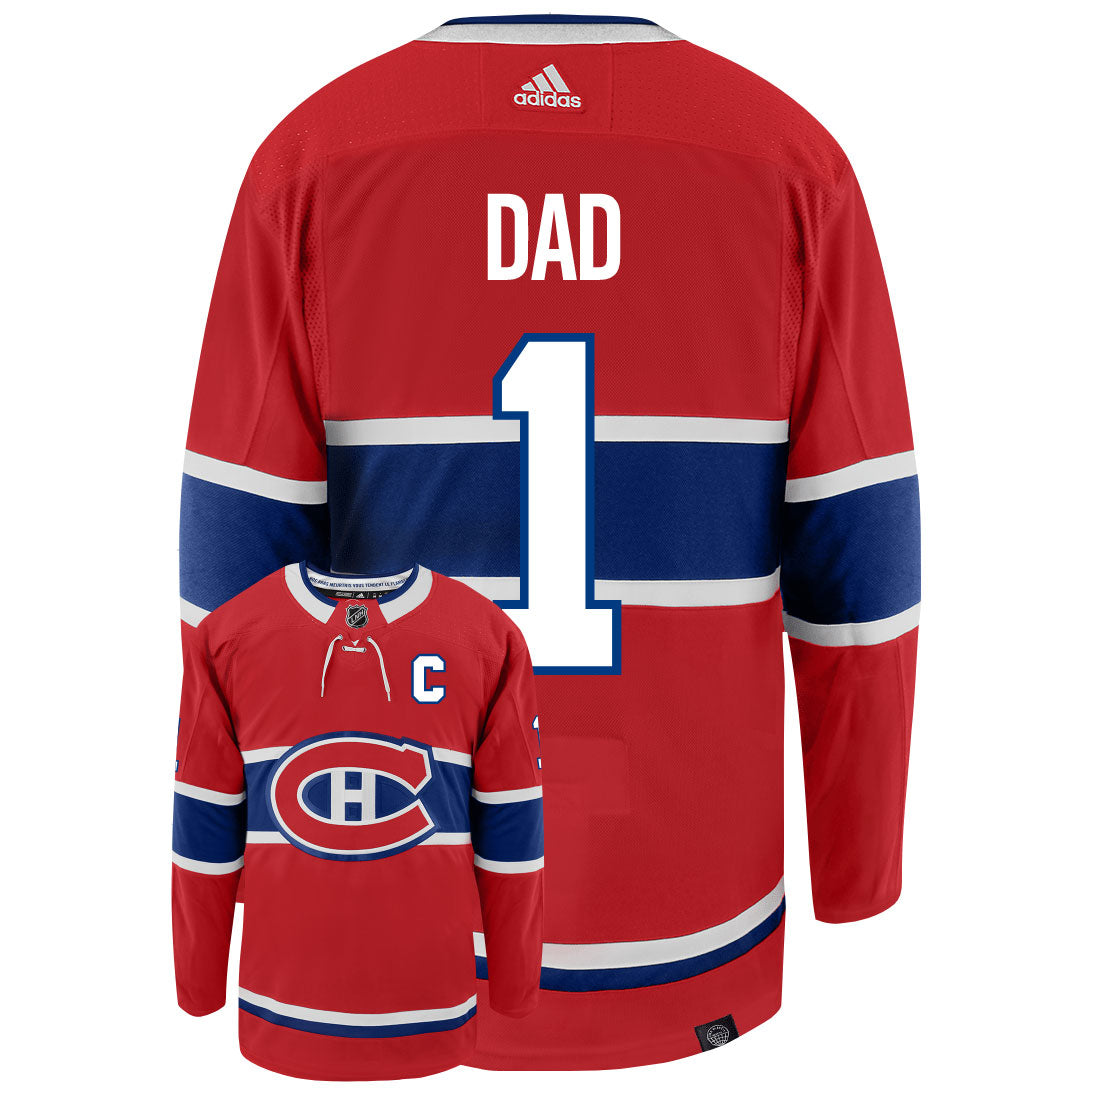 Montreal Canadiens Dad Number One Adidas Primegreen Authentic NHL Hockey Jersey - Back/Front View